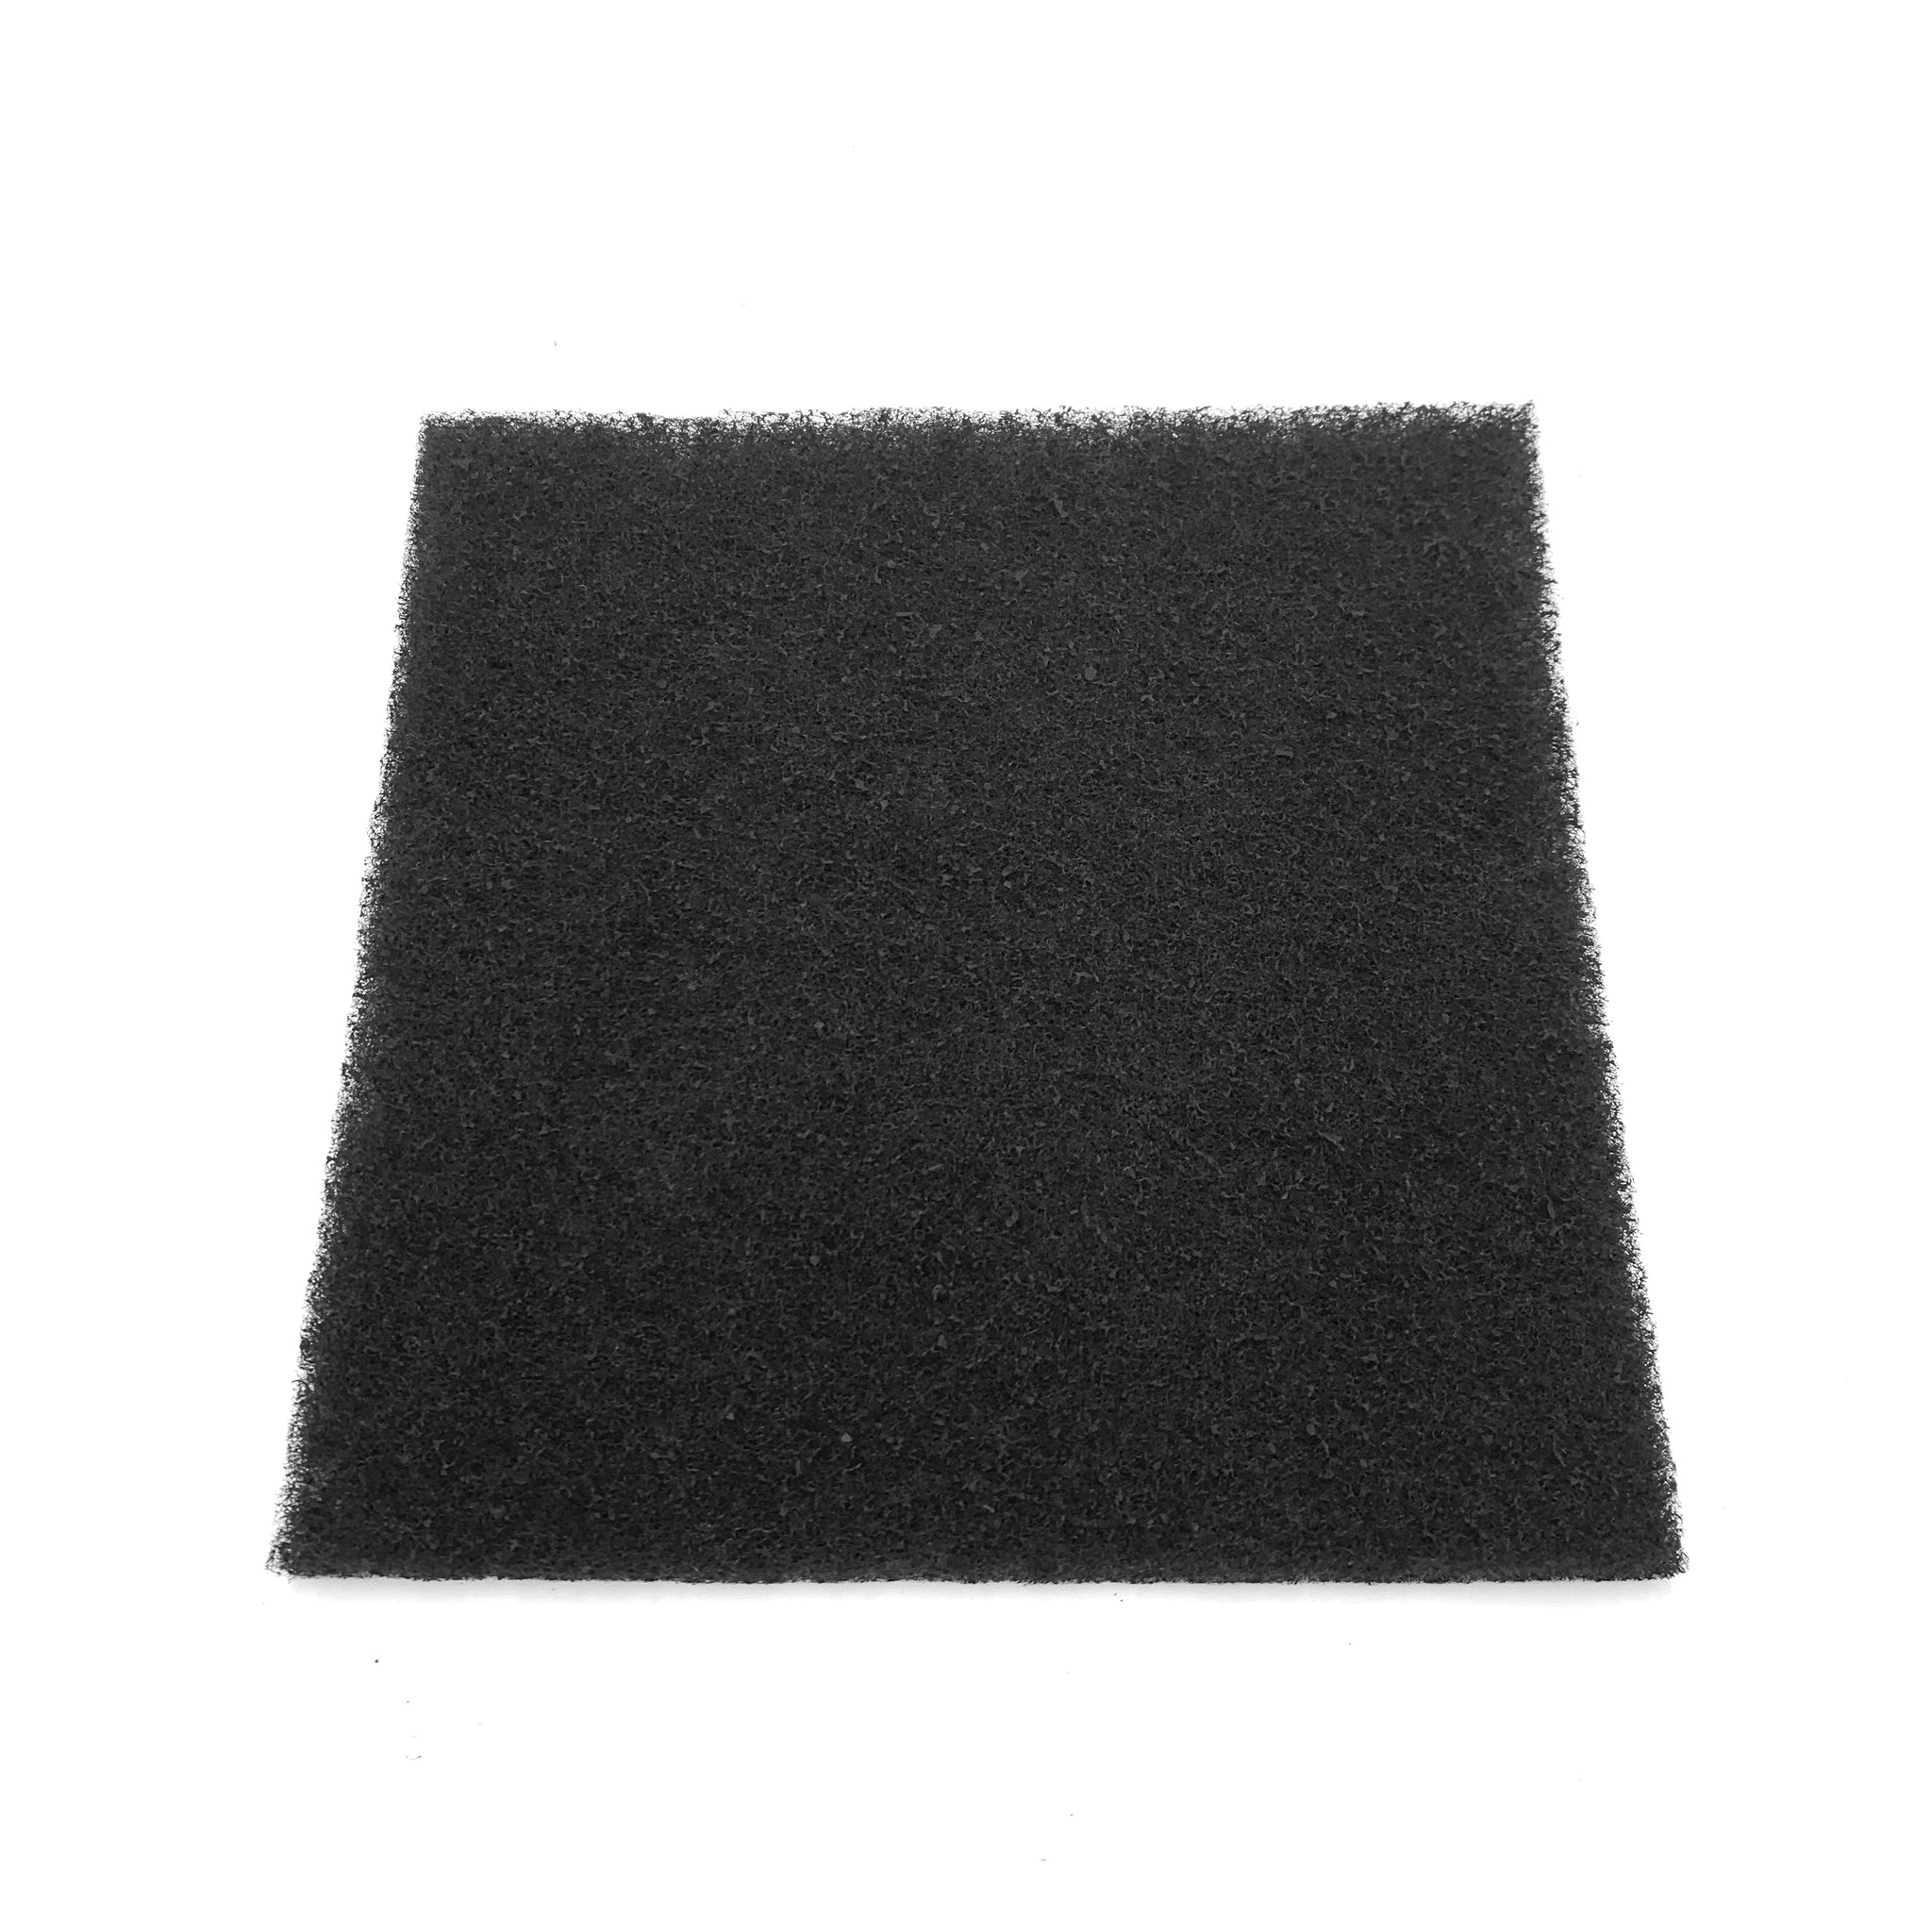 Replacement Media Carbon Pads (1pcs) for Pondmaster 1000 or 2000